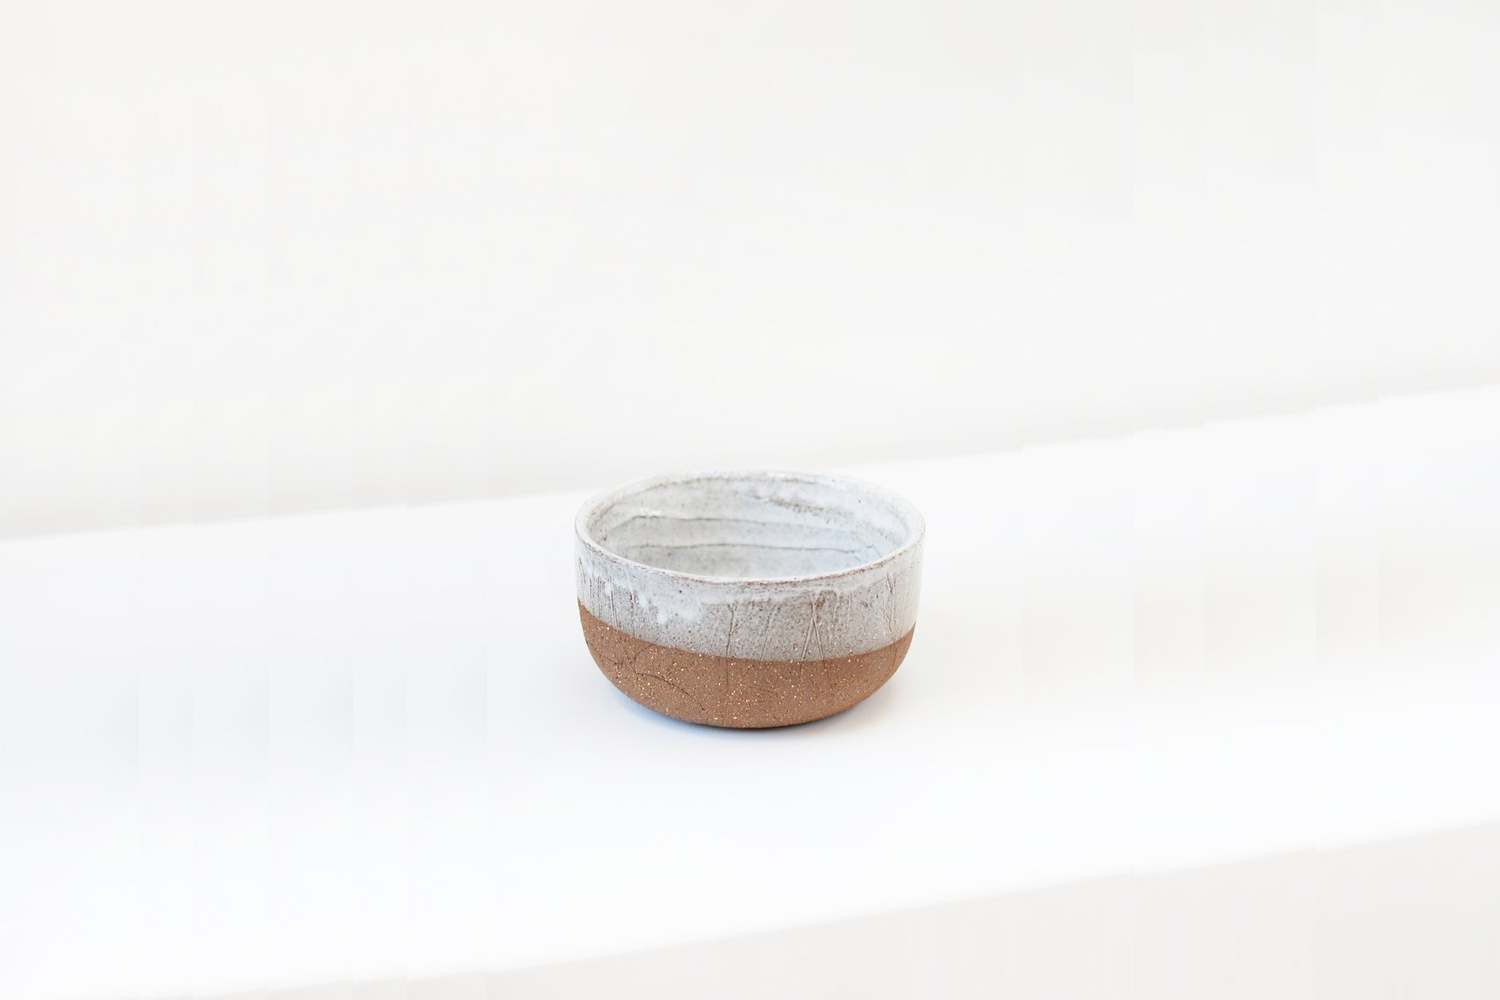 the udon bowl in basic white is £48 at kana london. 18